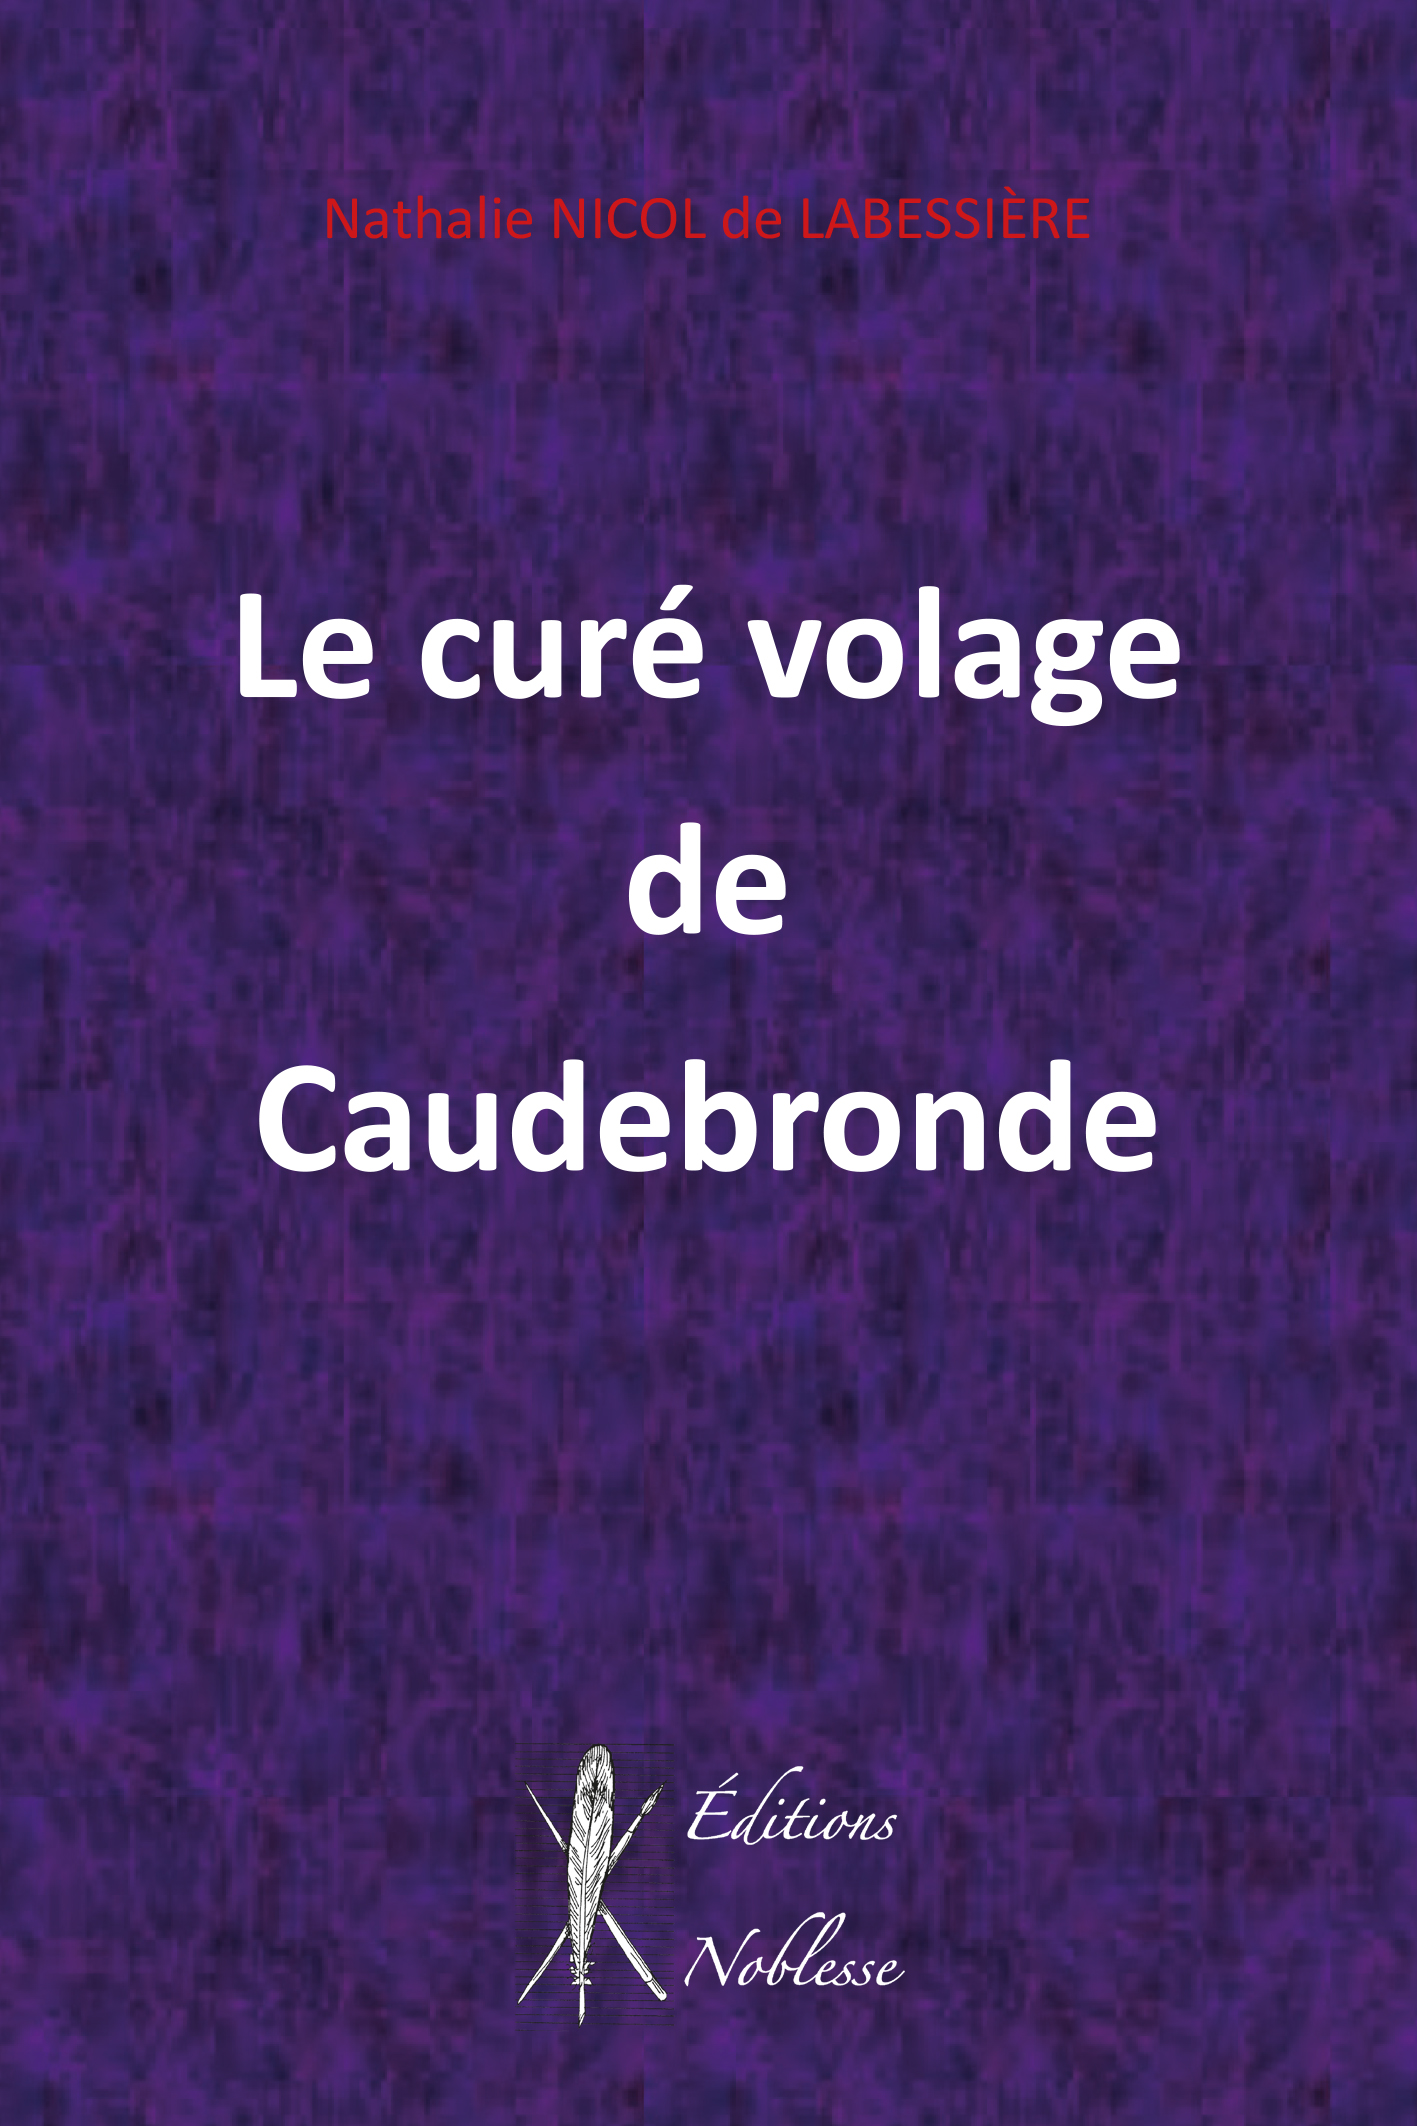 1C-CURE-VOLAGE